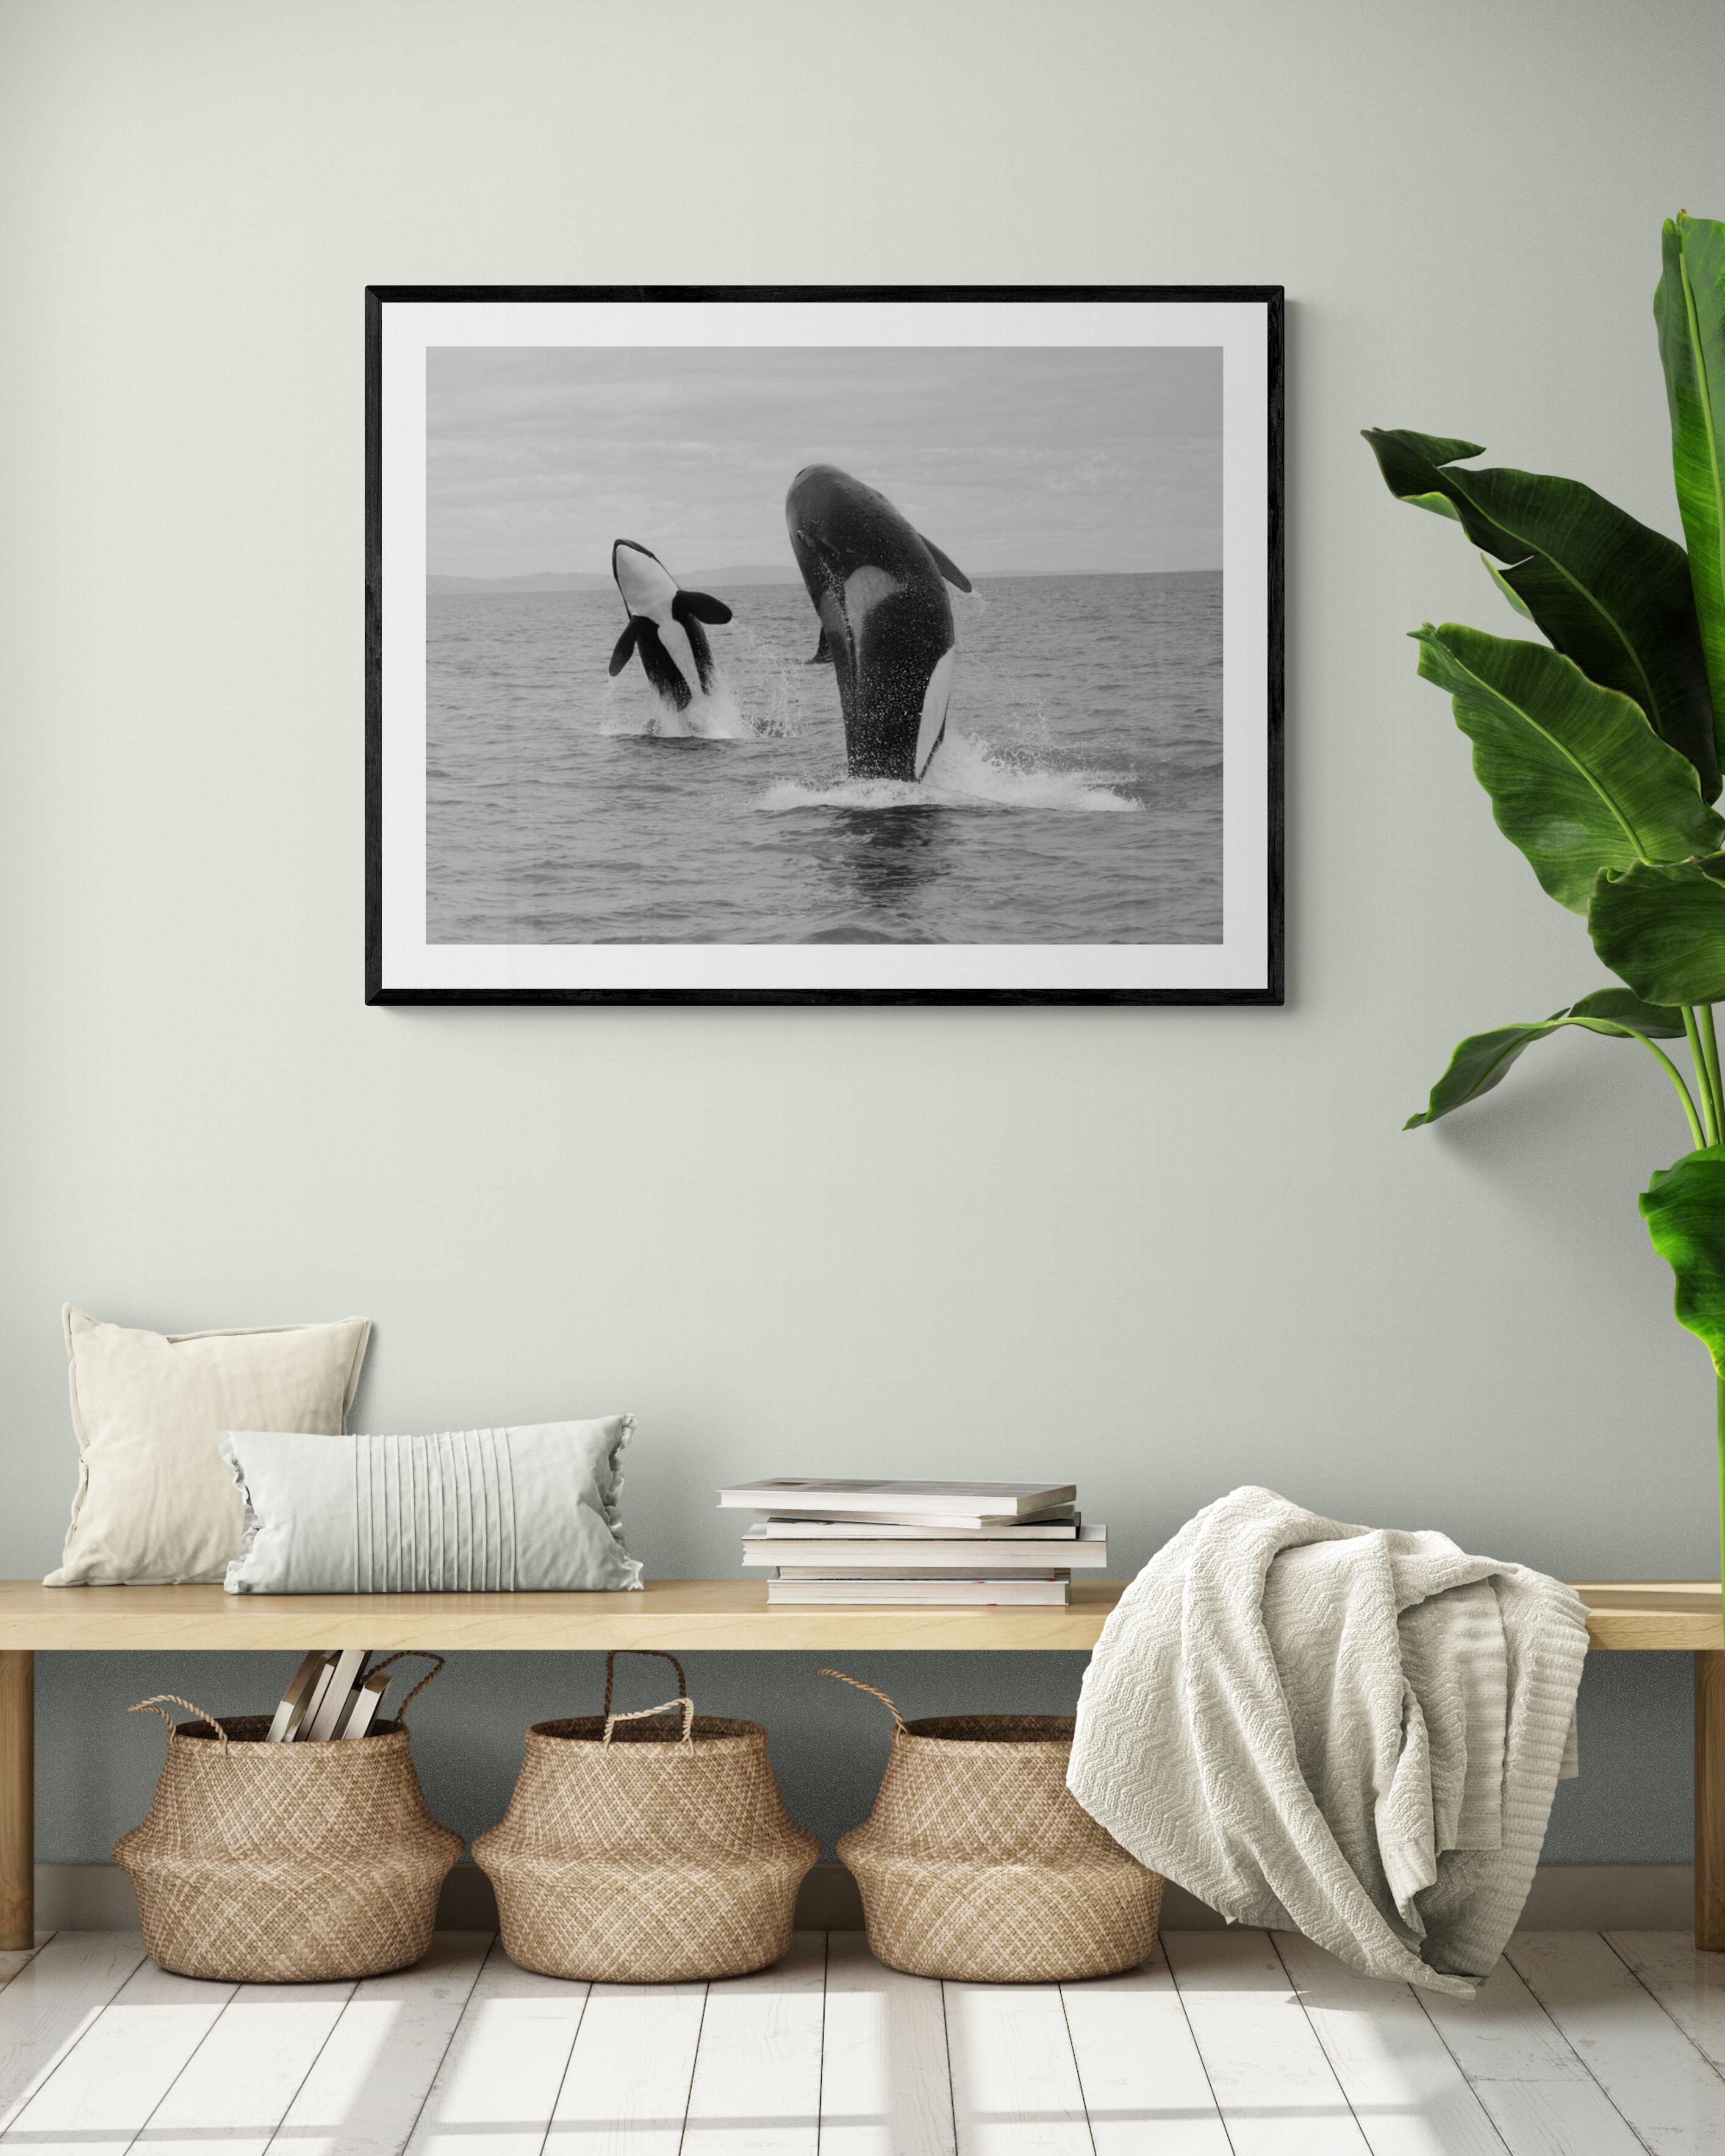  Shot in the off the San Juan Islands this is the only known image of a double synchronized breach with two adult Orcas. This was truly a once in a lifetime event.
This is the first time this image has been offered for sale. 
20x30 Edition of